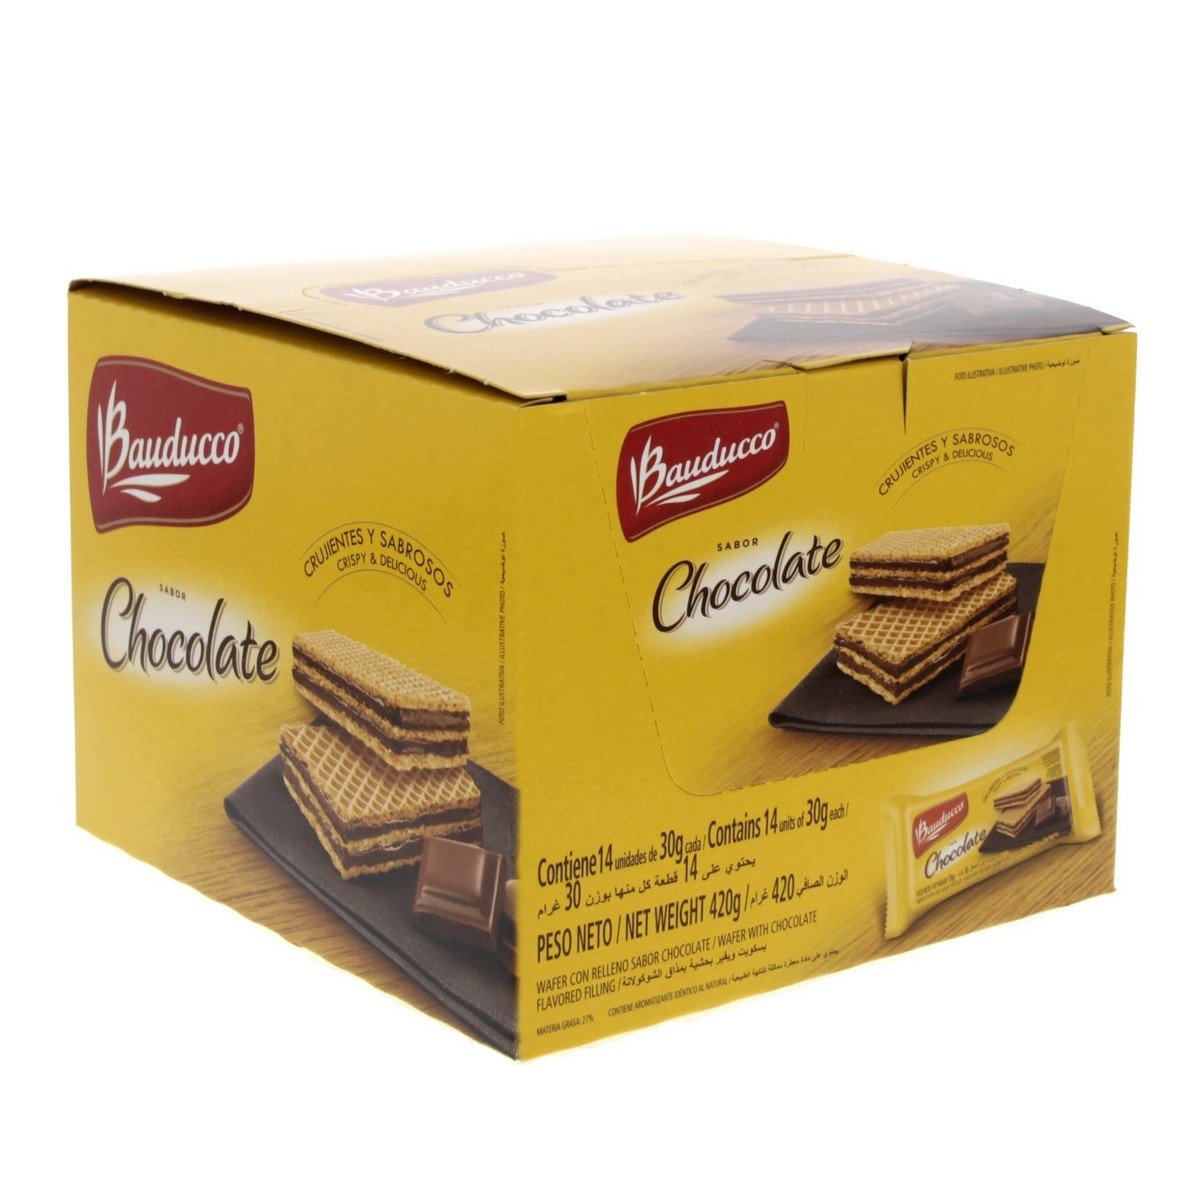 Bauducco Chocolate Filling Wafer 14 x 30 g